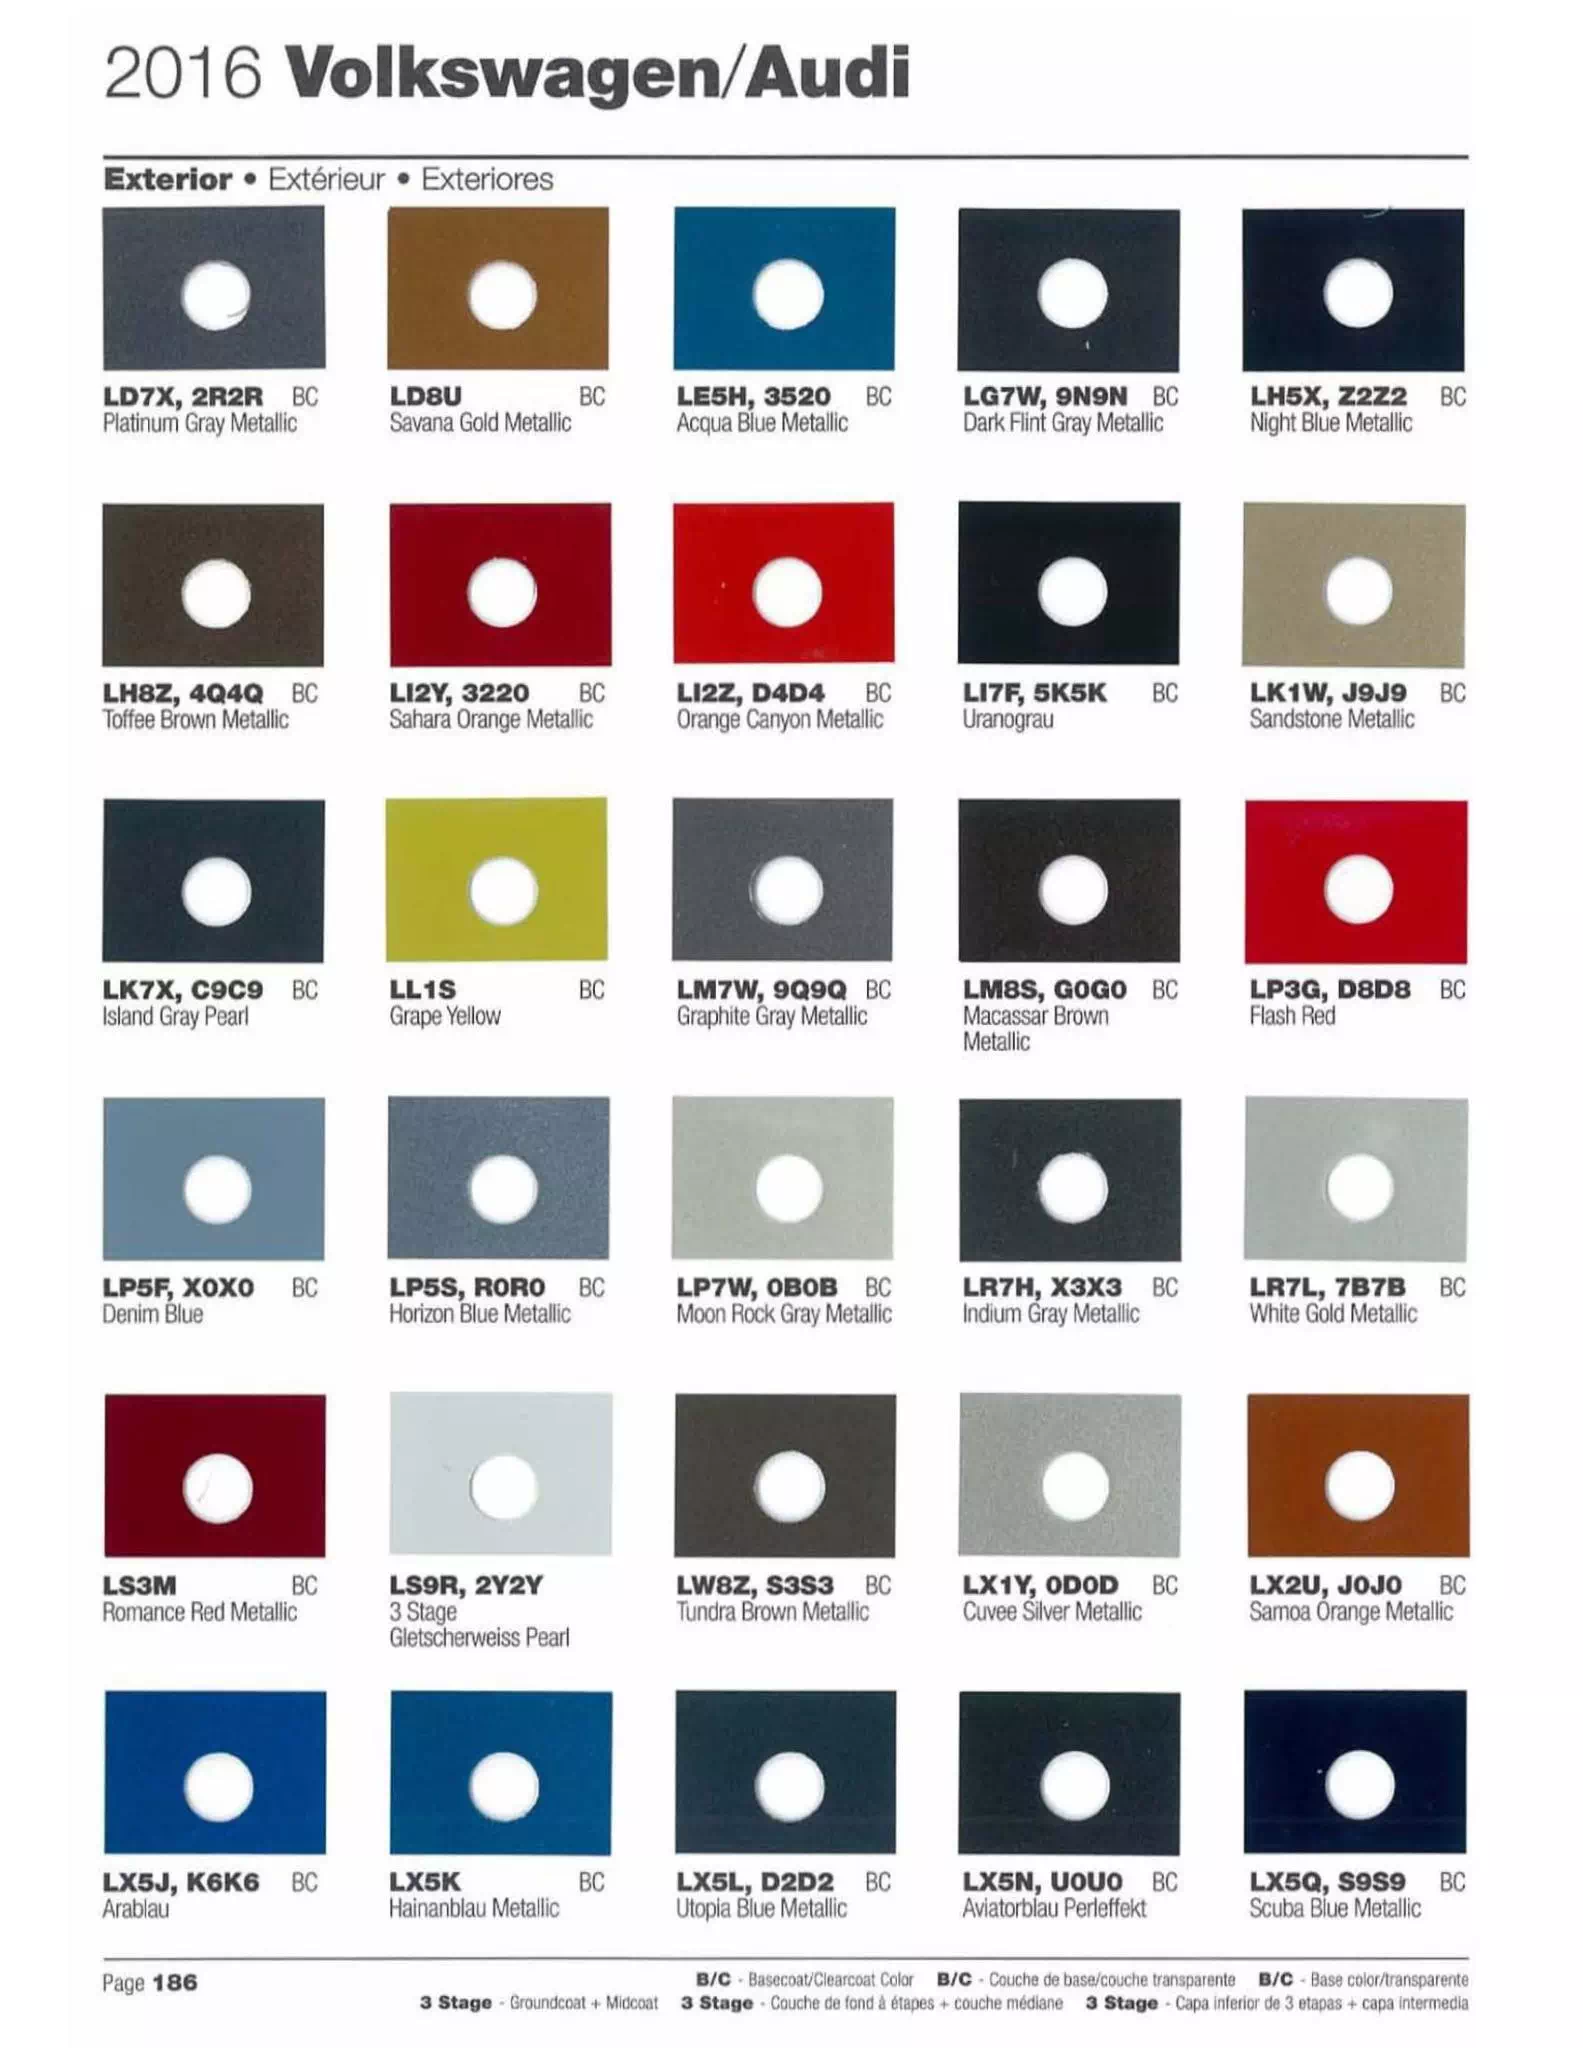 Exterior Colors Used on Volkswagen and Audi on 2016